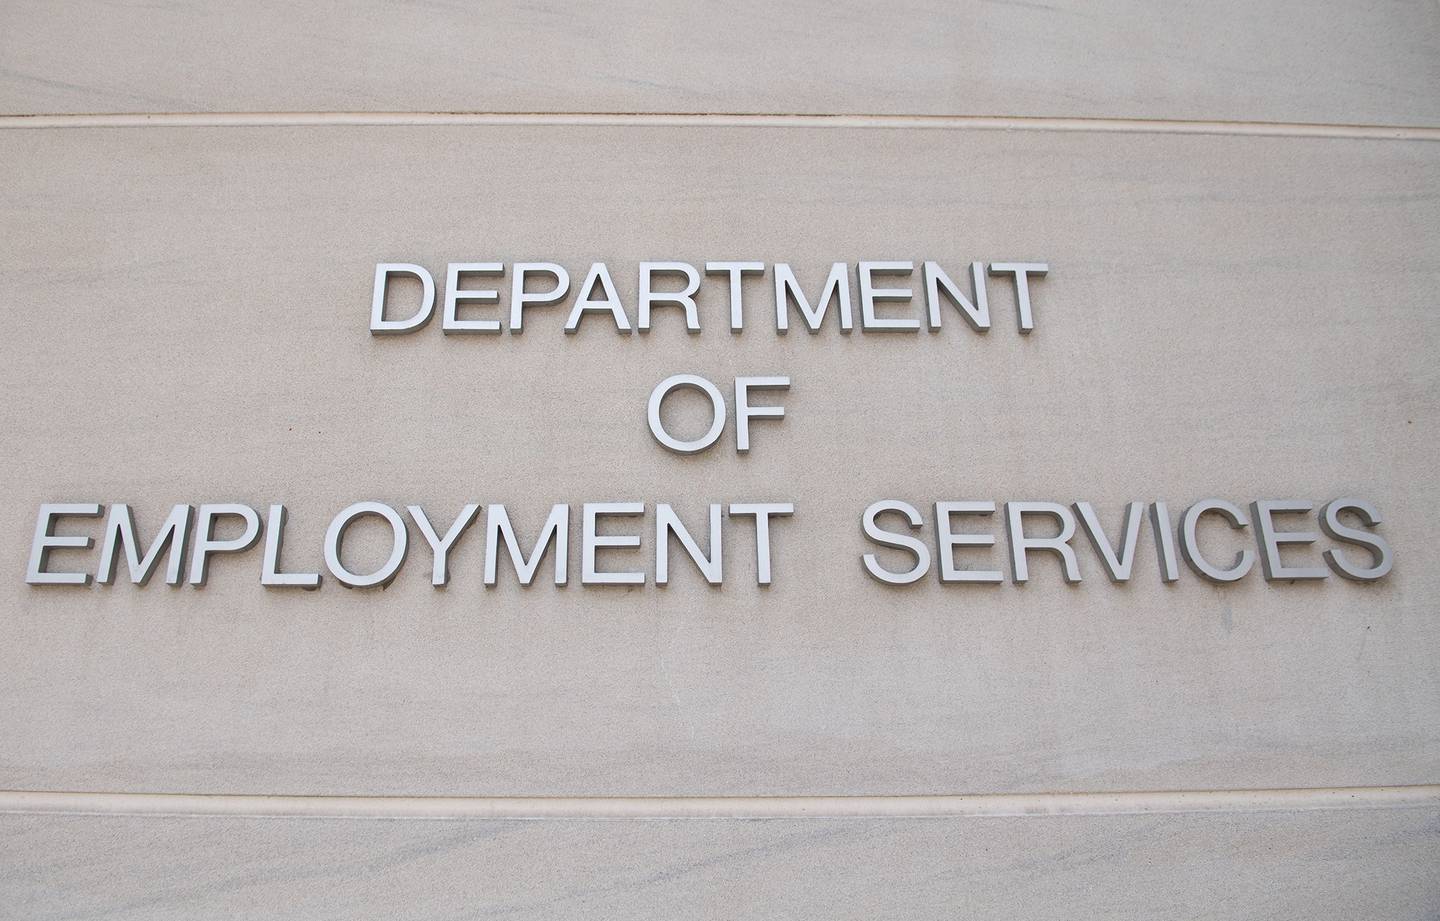 The D.C. Department of Employment Services, which handles unemployment claims for D.C. residents, is seen in Washington on July 16, 2020.